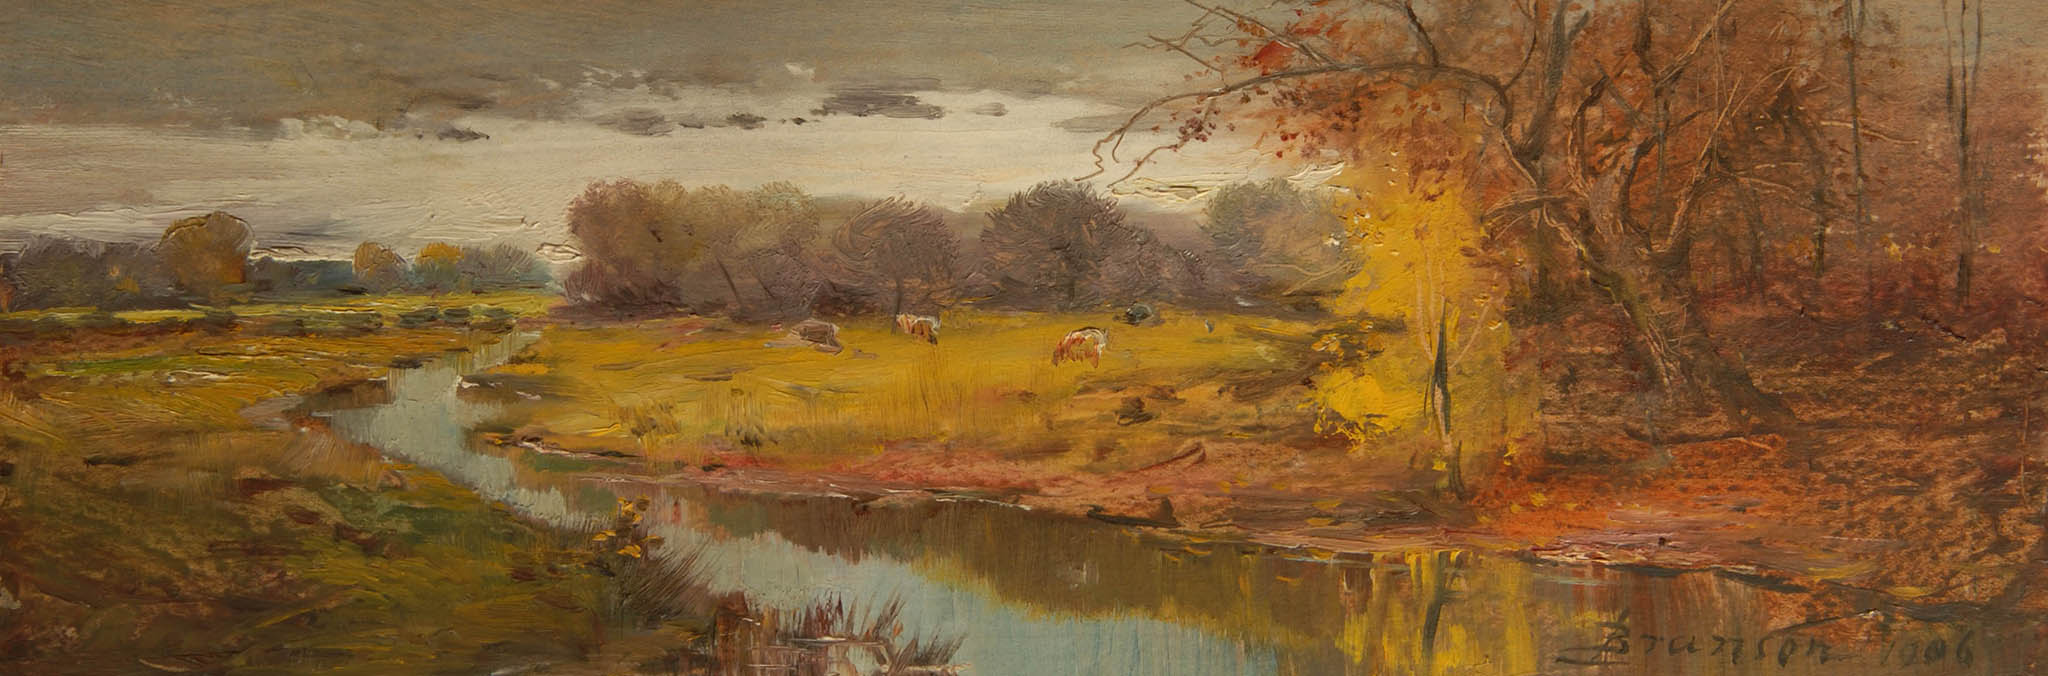 Pasture scene with cows and stream